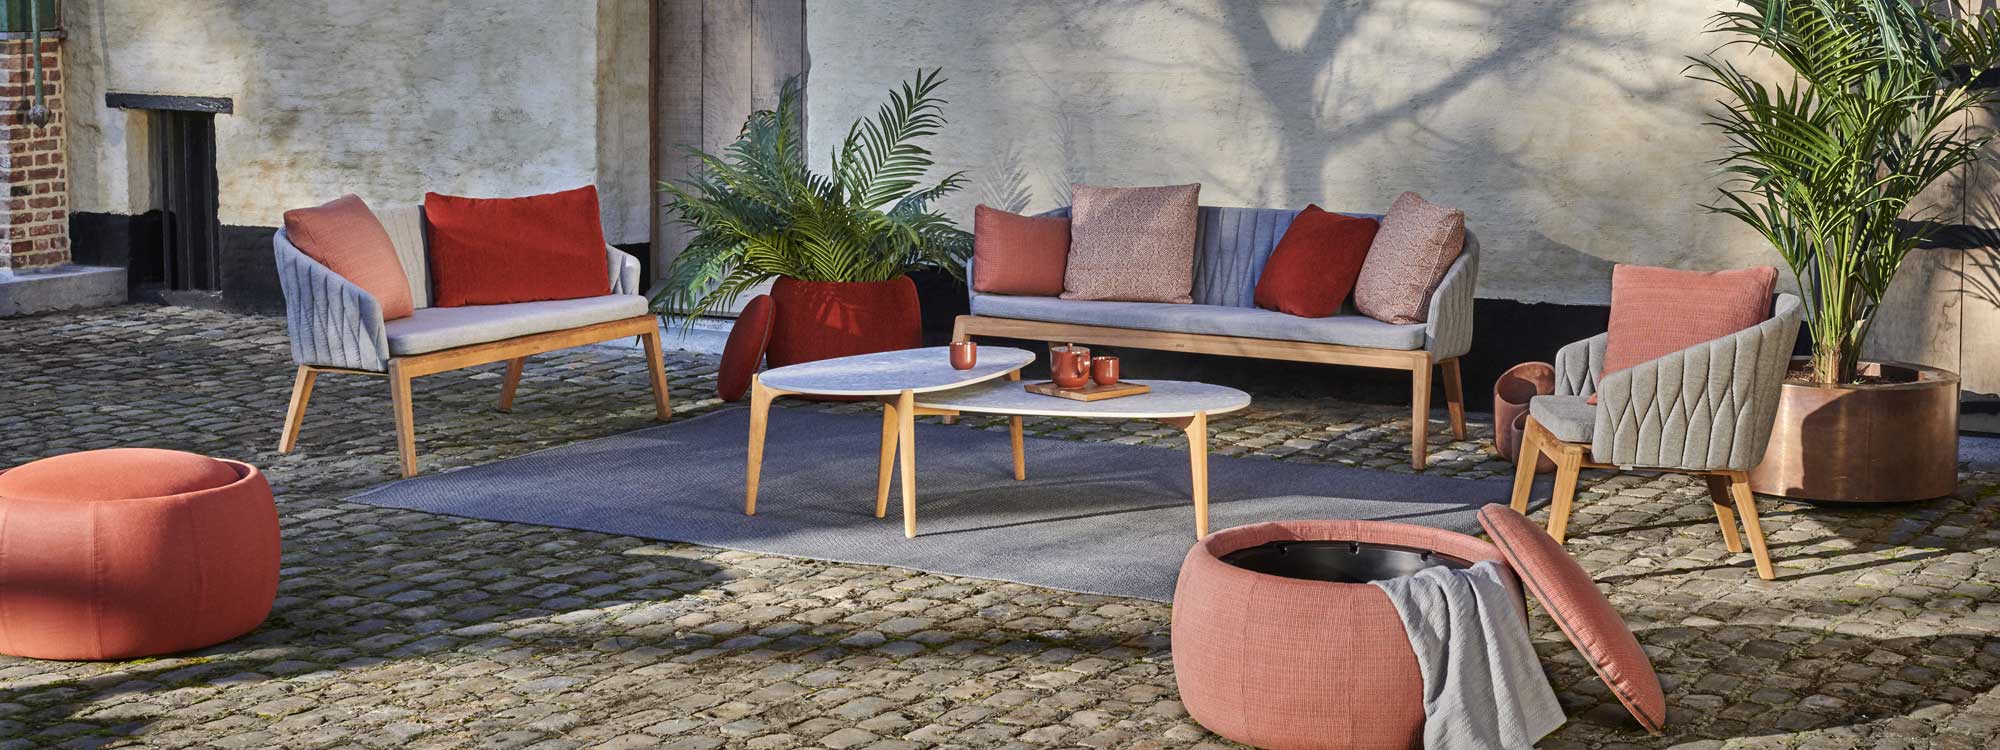 Tea Time garden low table is a ceramic exterior coffee table in luxury outdoor table materials by Royal Botania modern garden furniture & Calypso lounge furniture and Tea Time exterior low tables